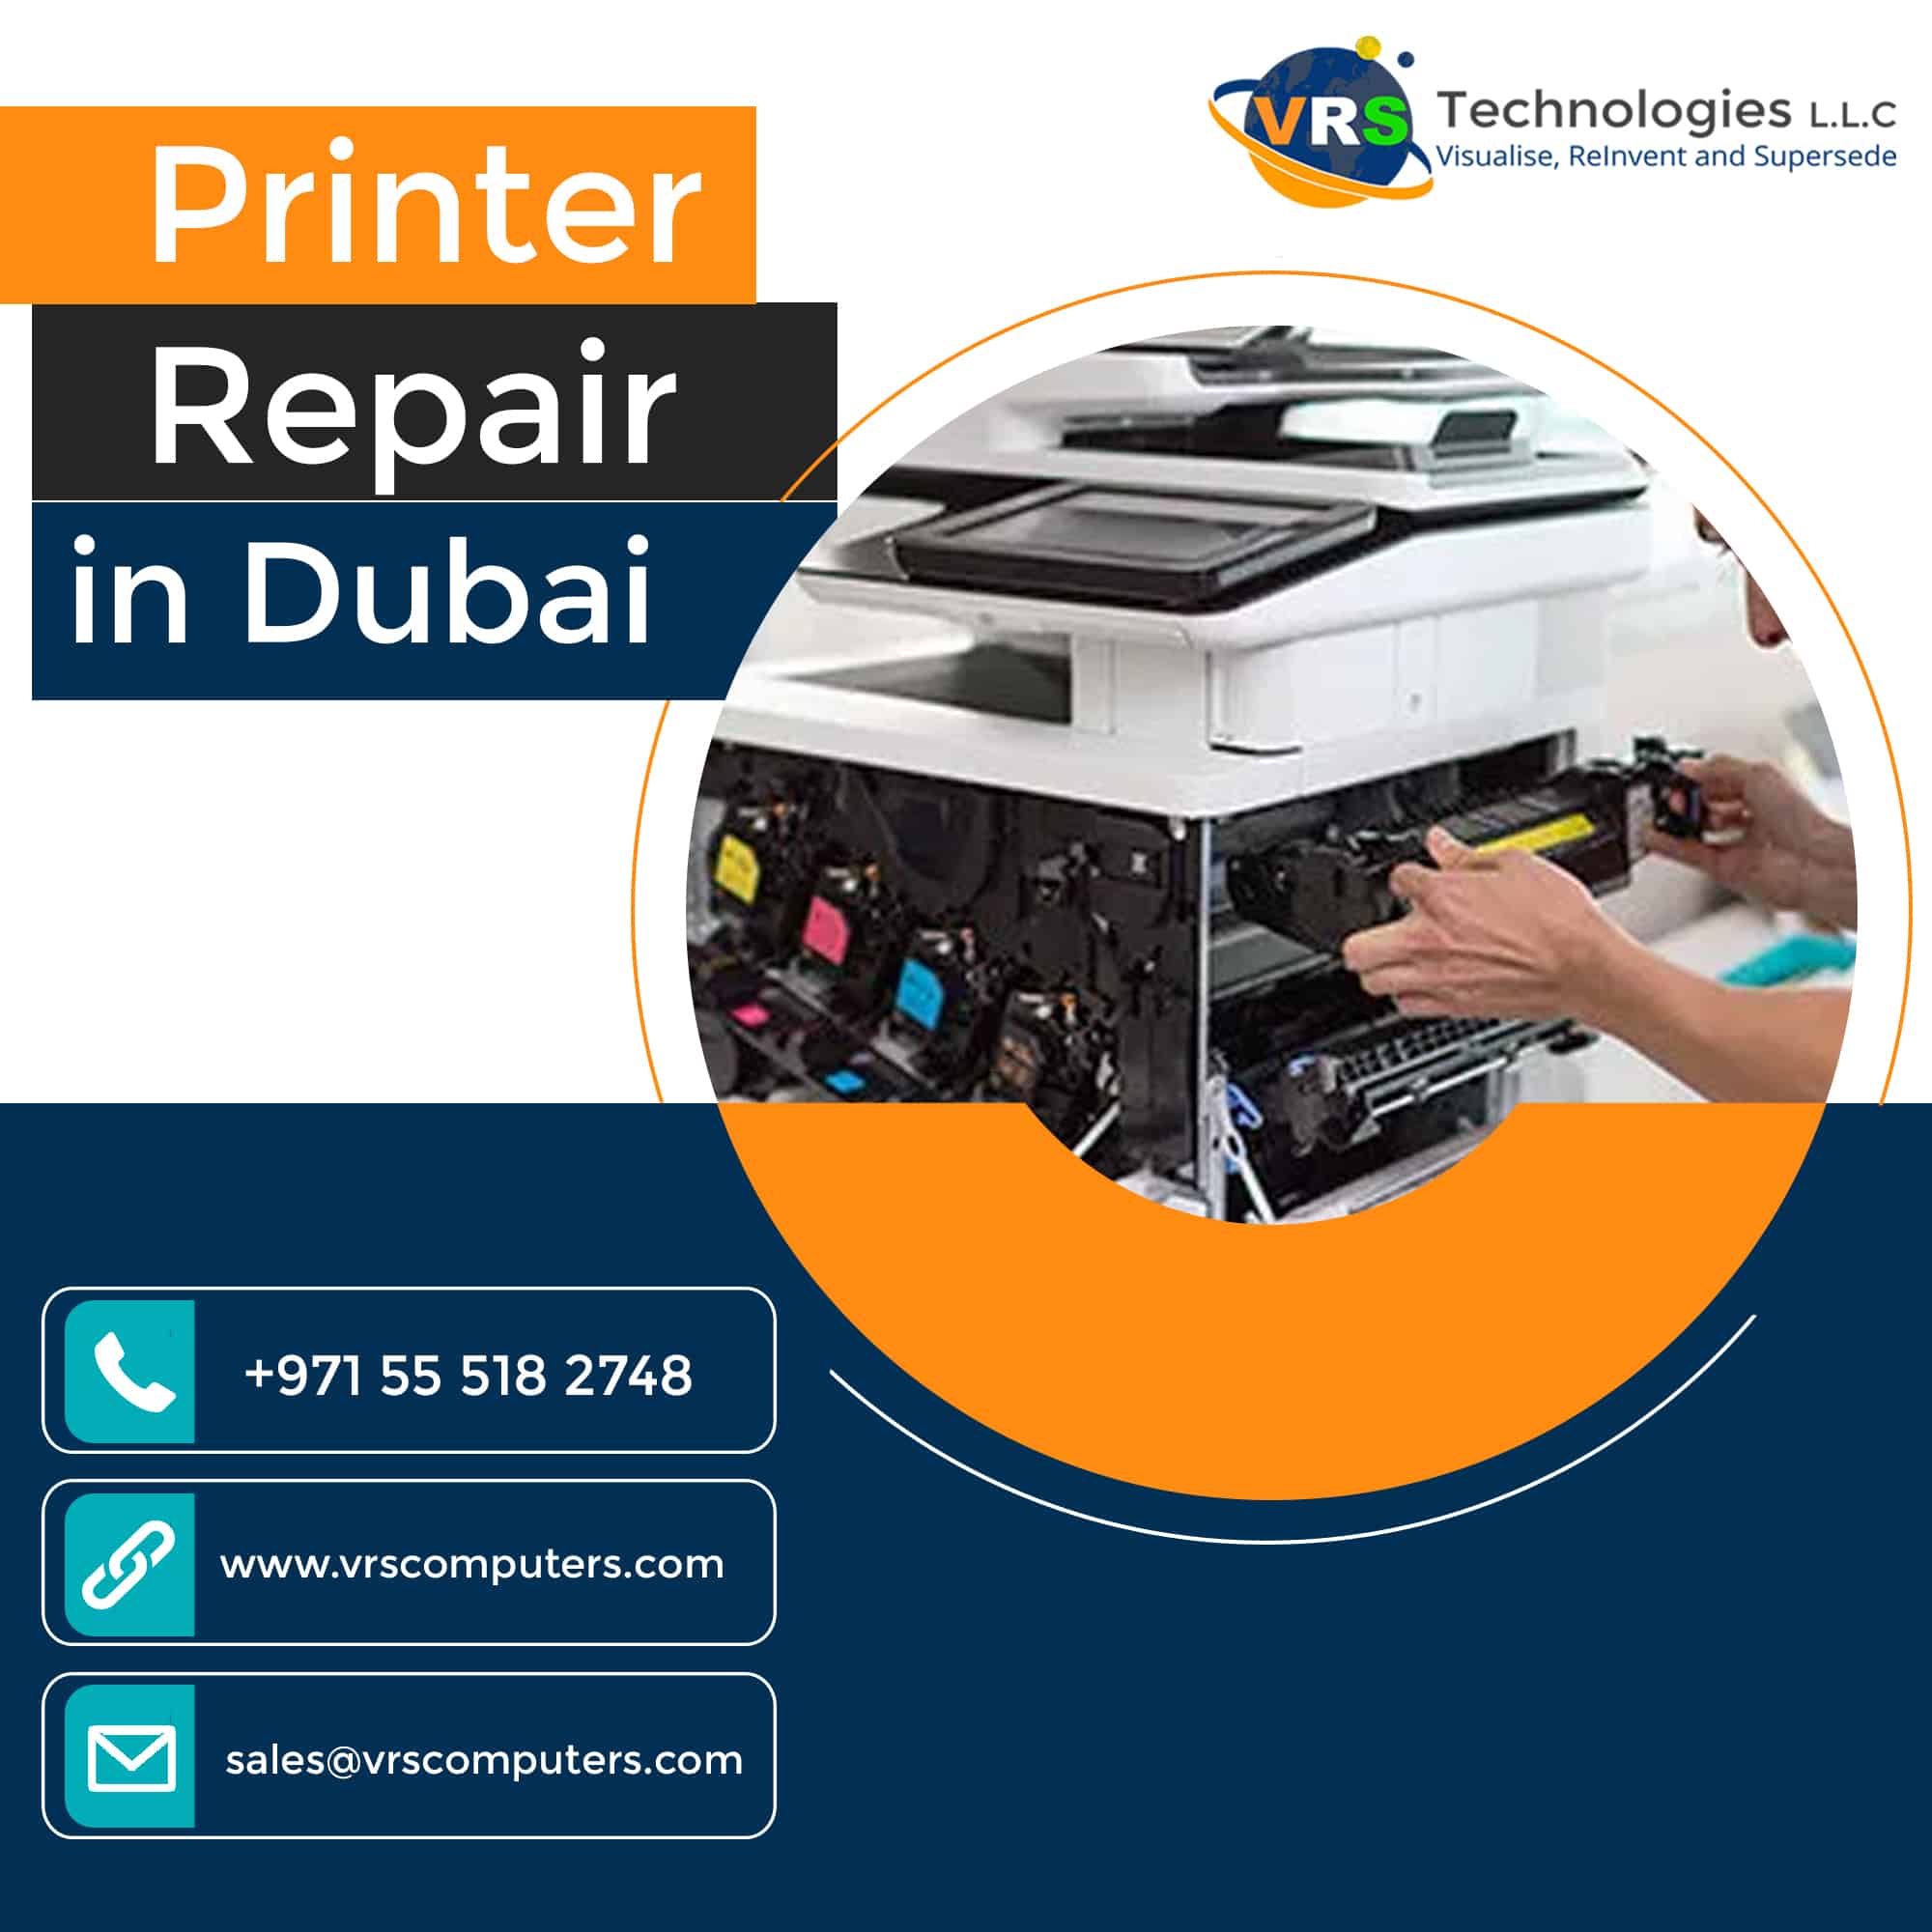 Is There An Easy Fix For Printer Issues And Maintenance In Dubai